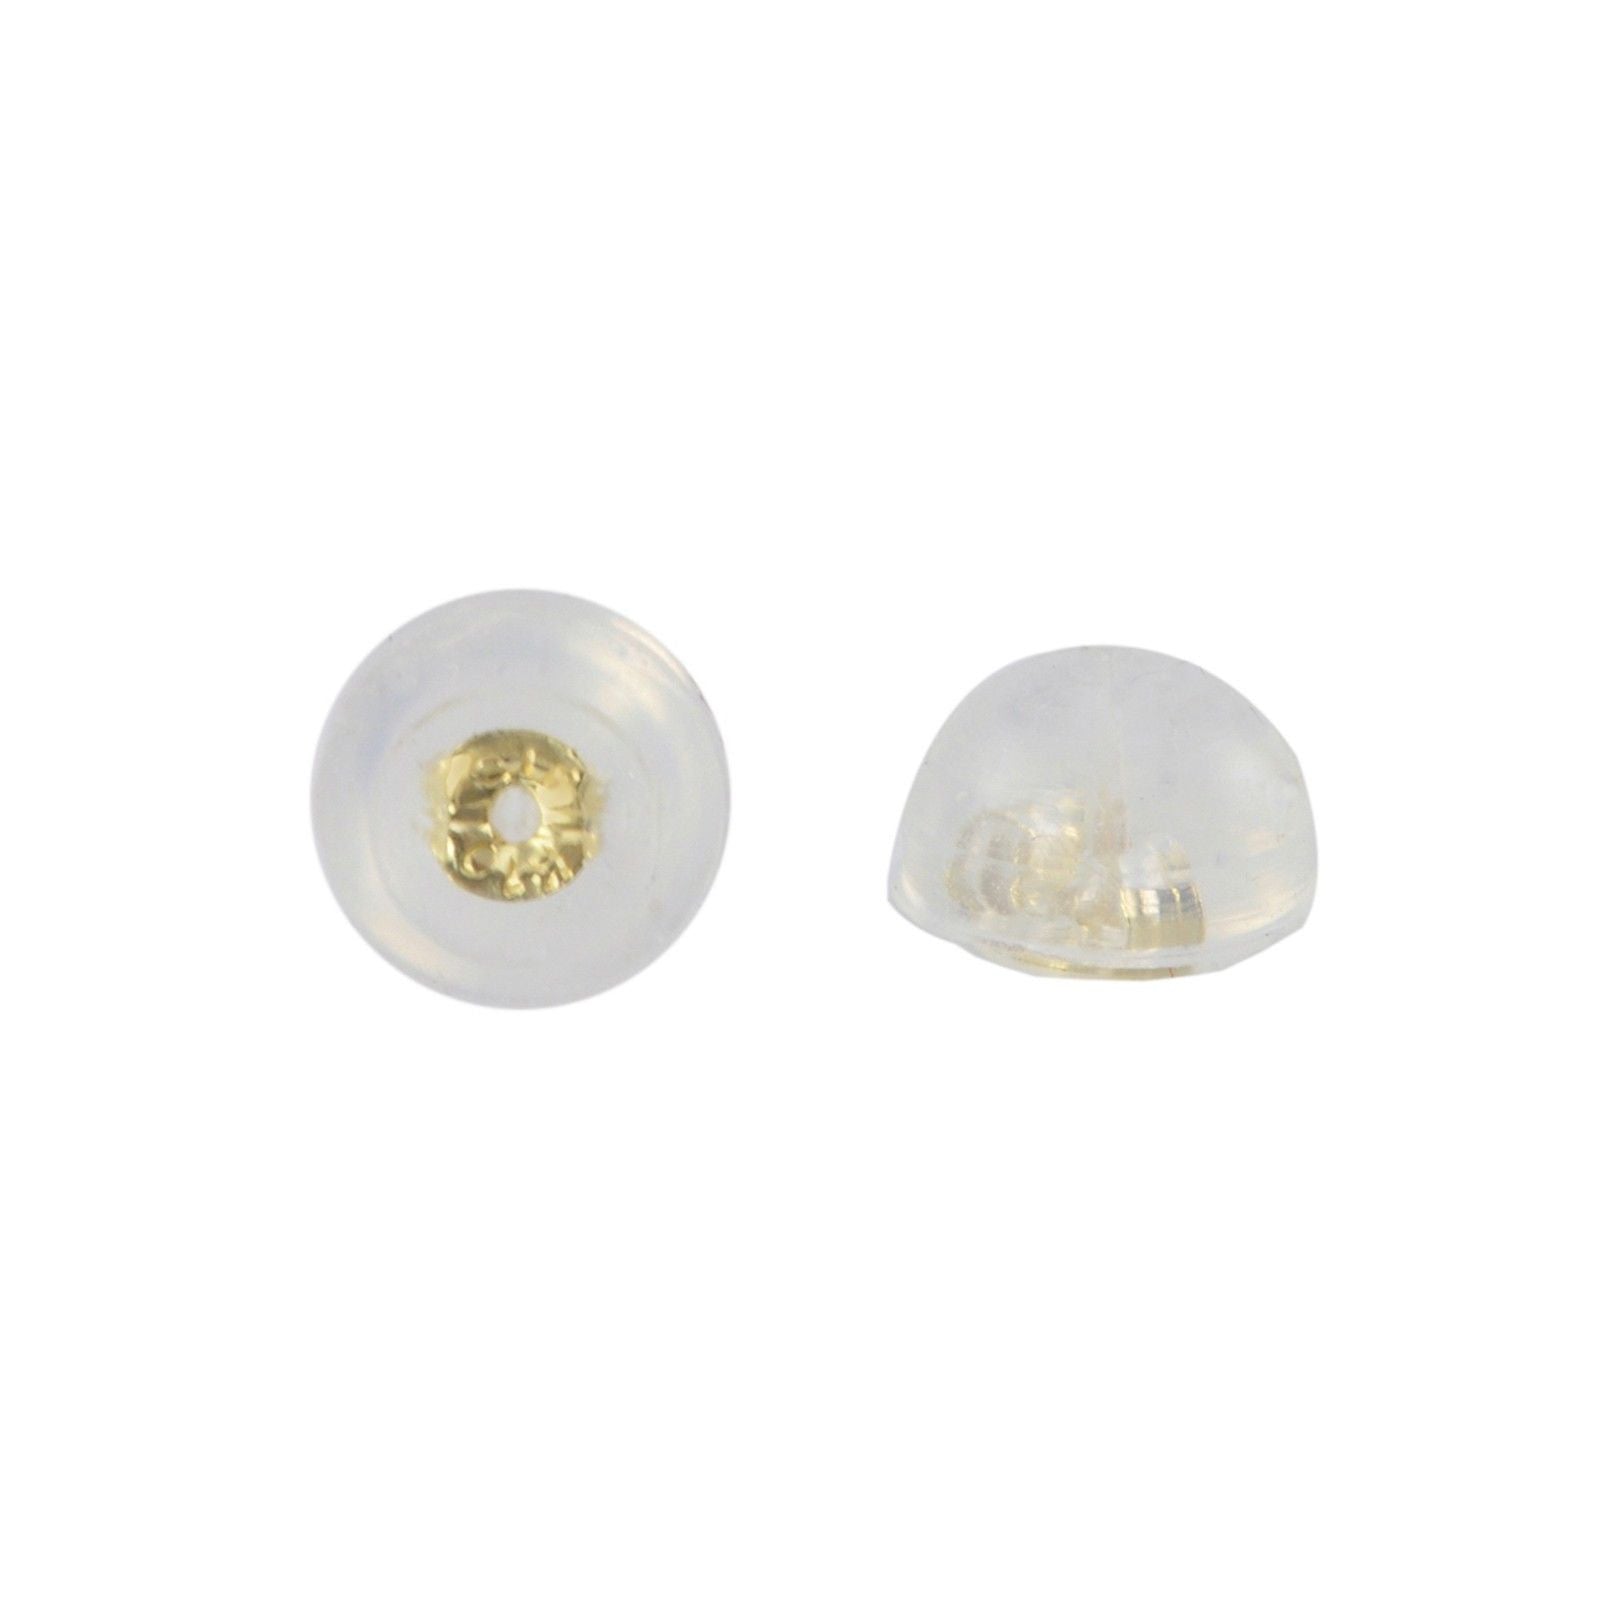 Silicone Earring Backs Clutches 10k Yellow Gold Inserts Screw back or